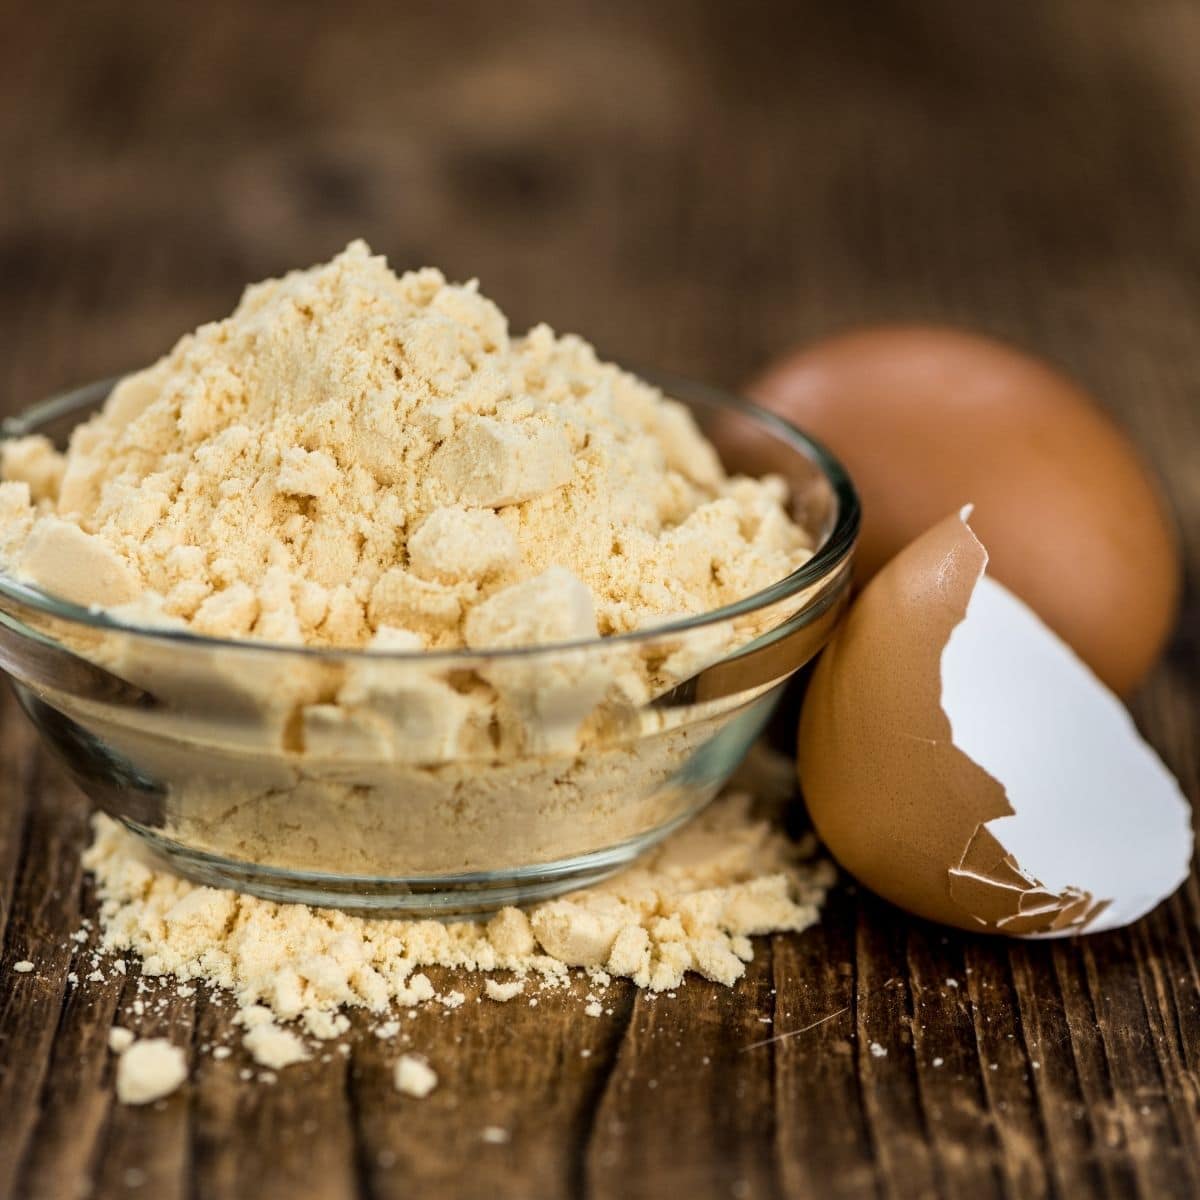 Powdered Egg Substitute